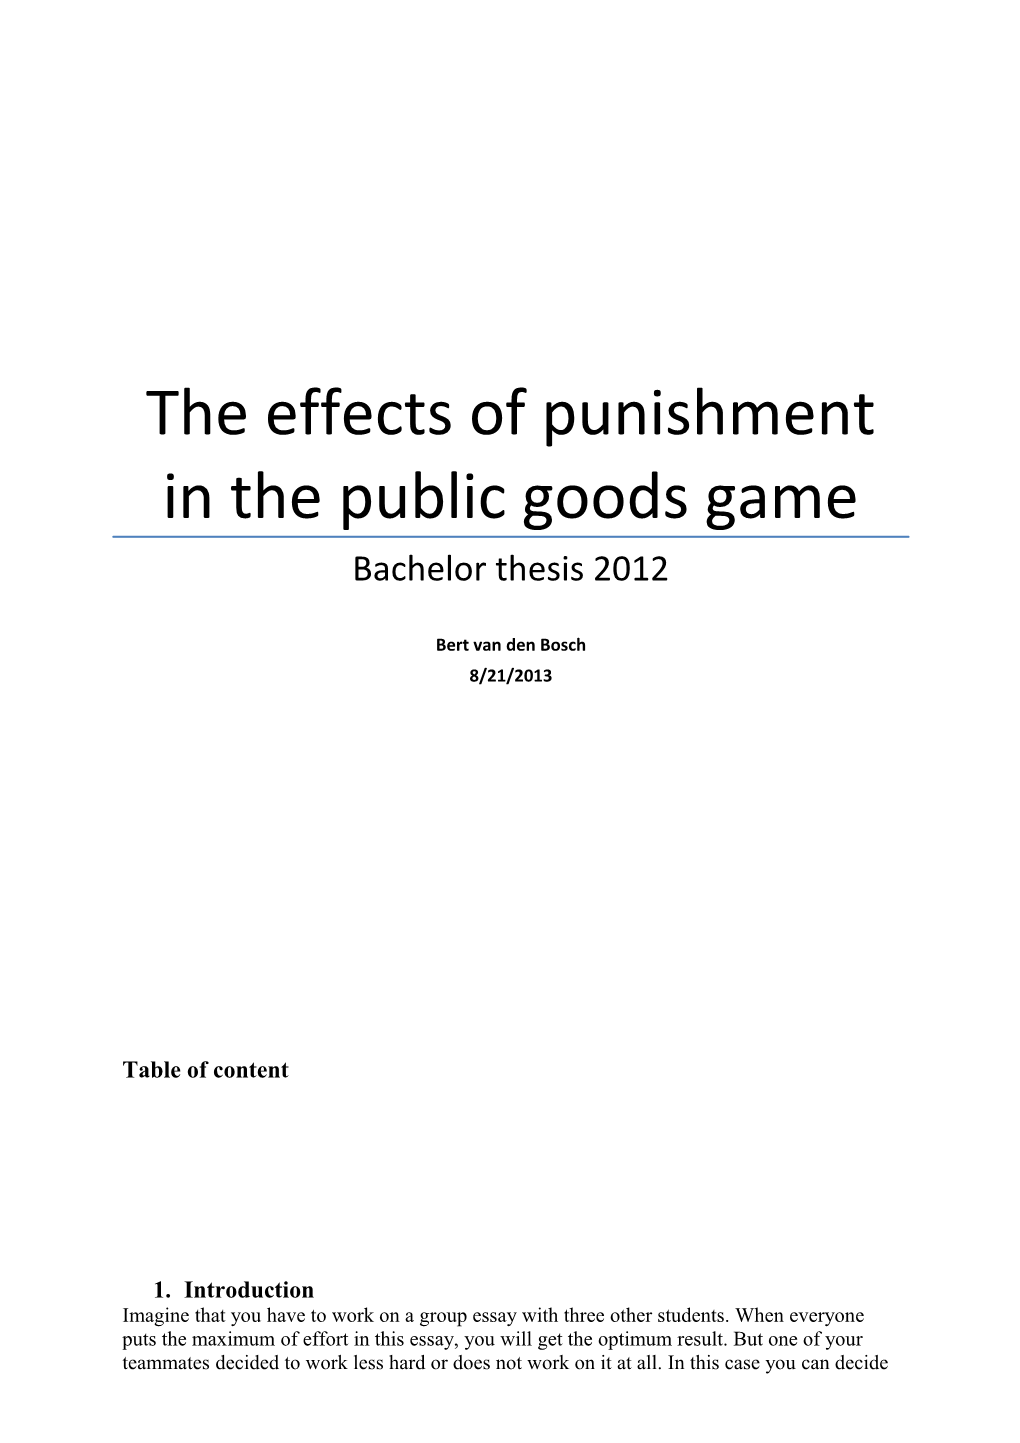 The Effects of Punishment in the Public Goods Game